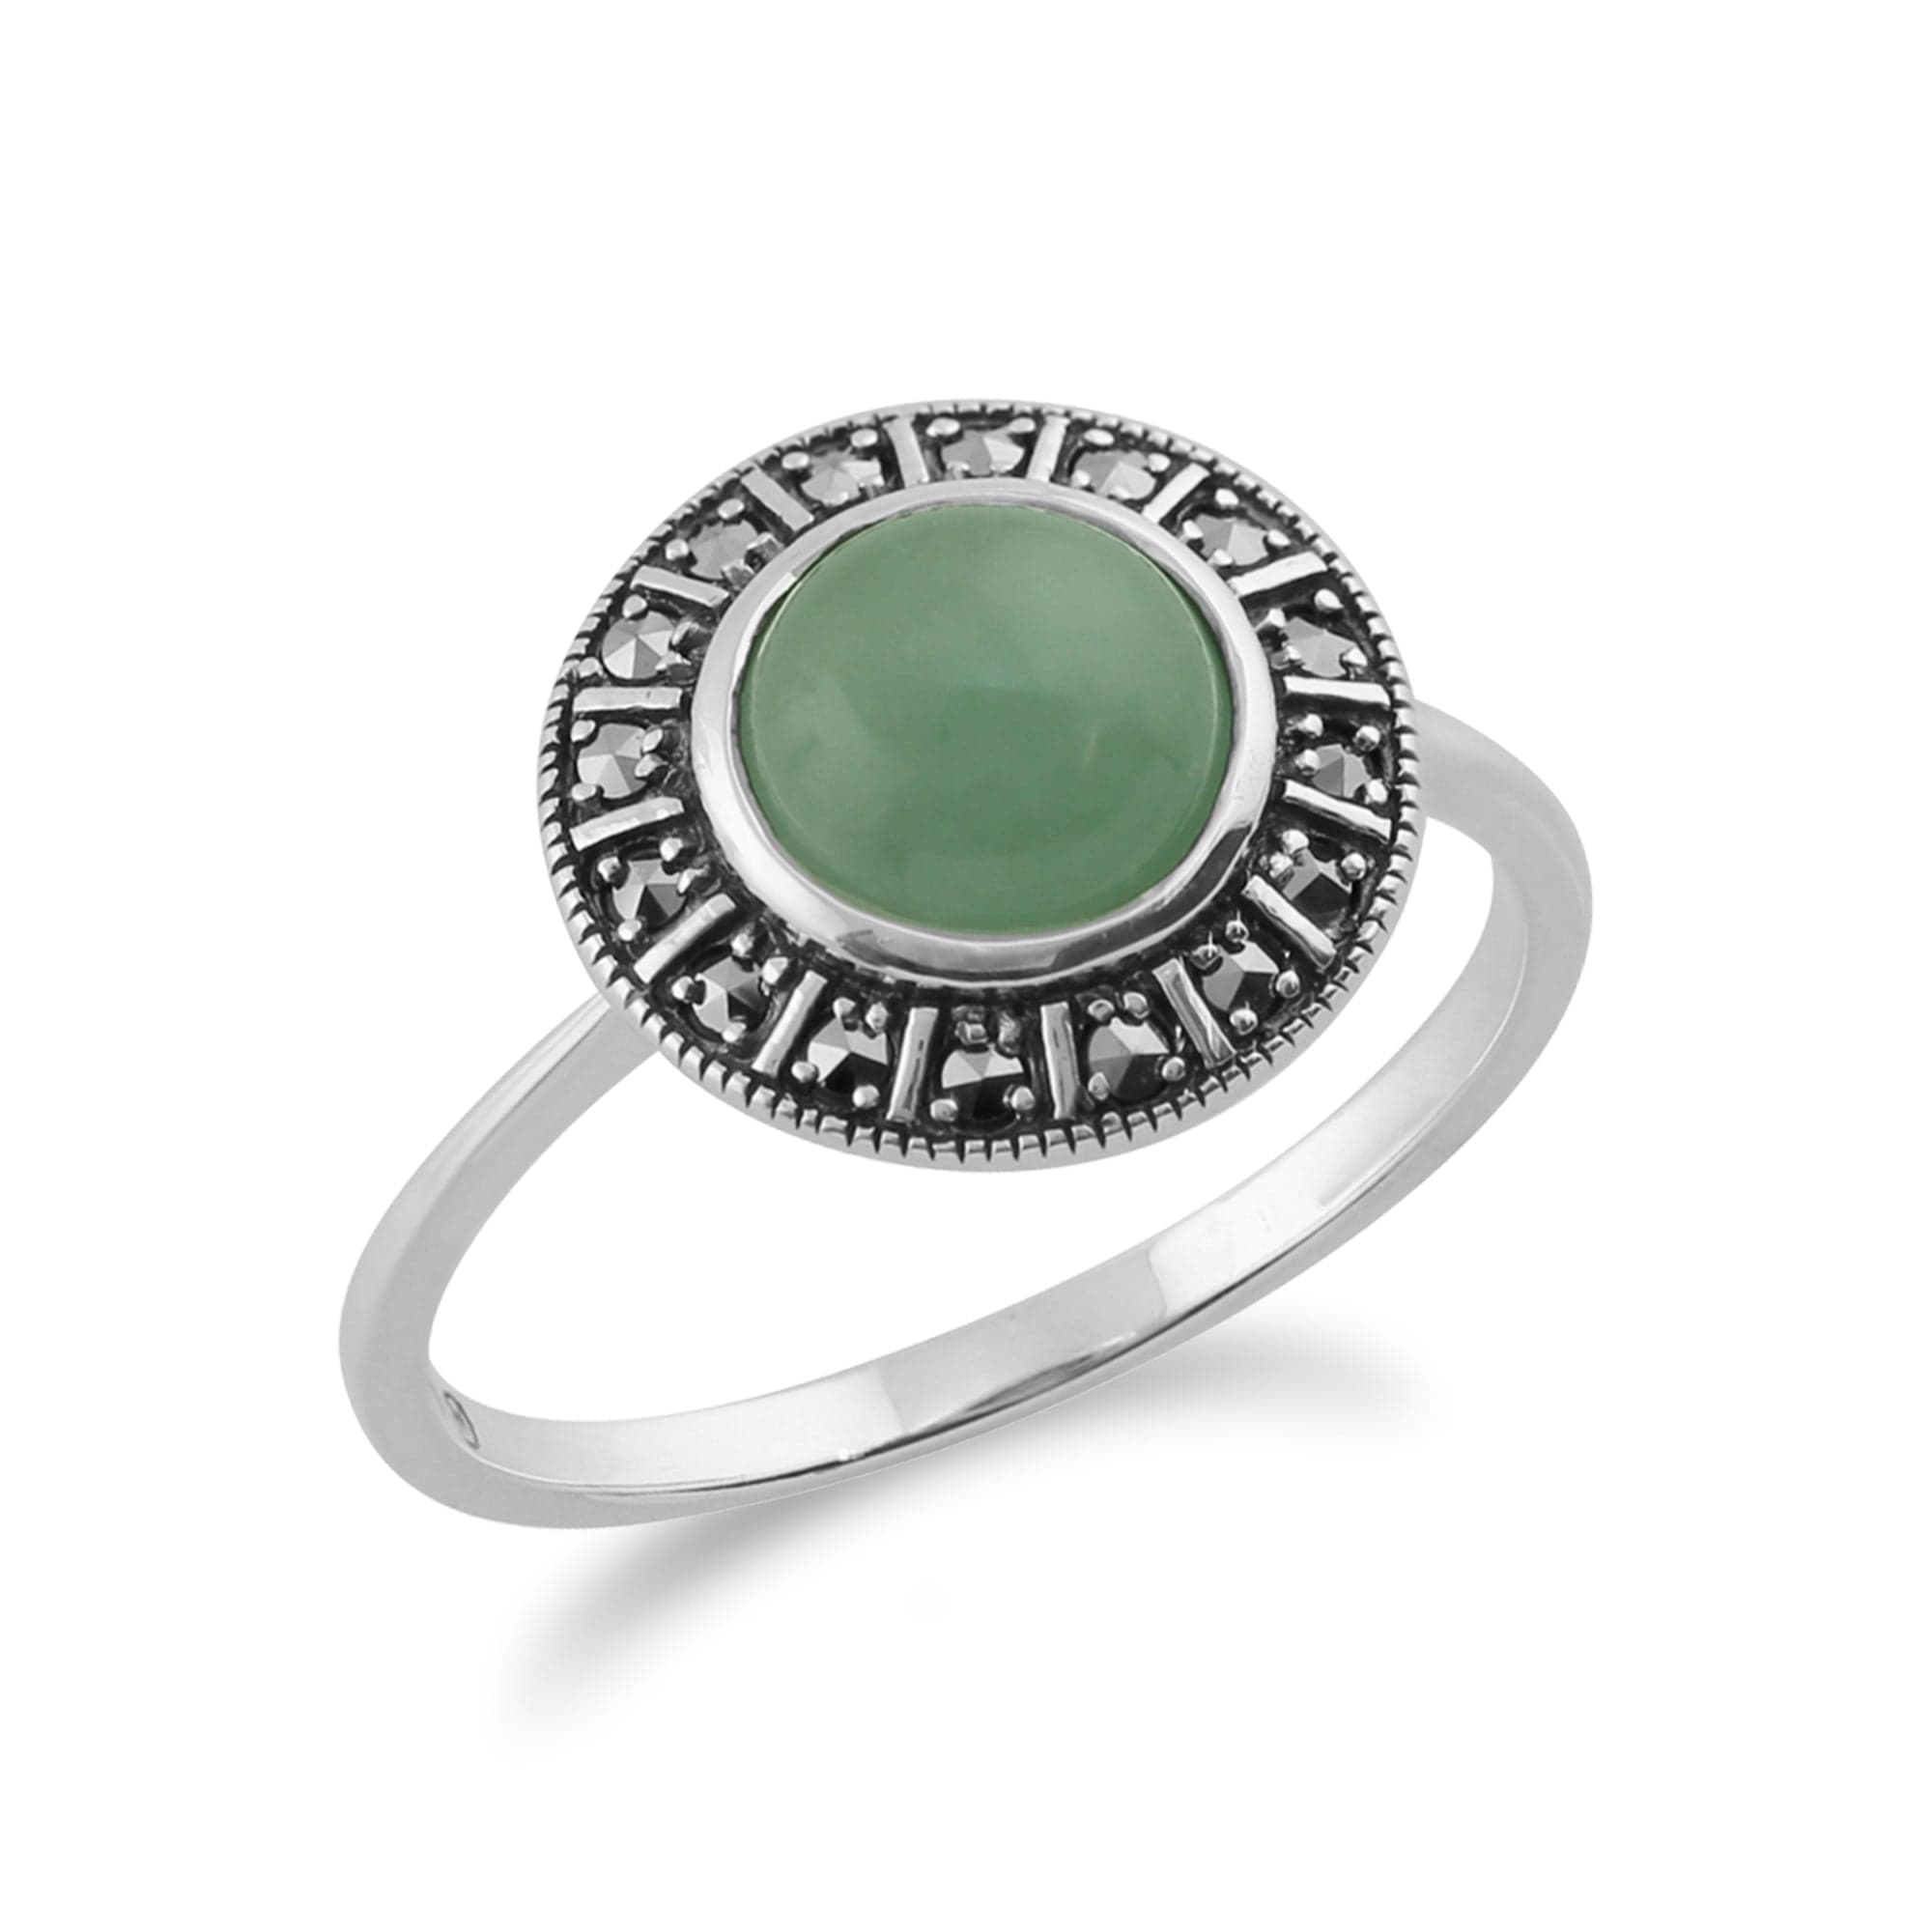 214R513409925 Art Deco Style Round Green Jade Cabochon & Marcasite Halo Ring in 925 Sterling Silver 2